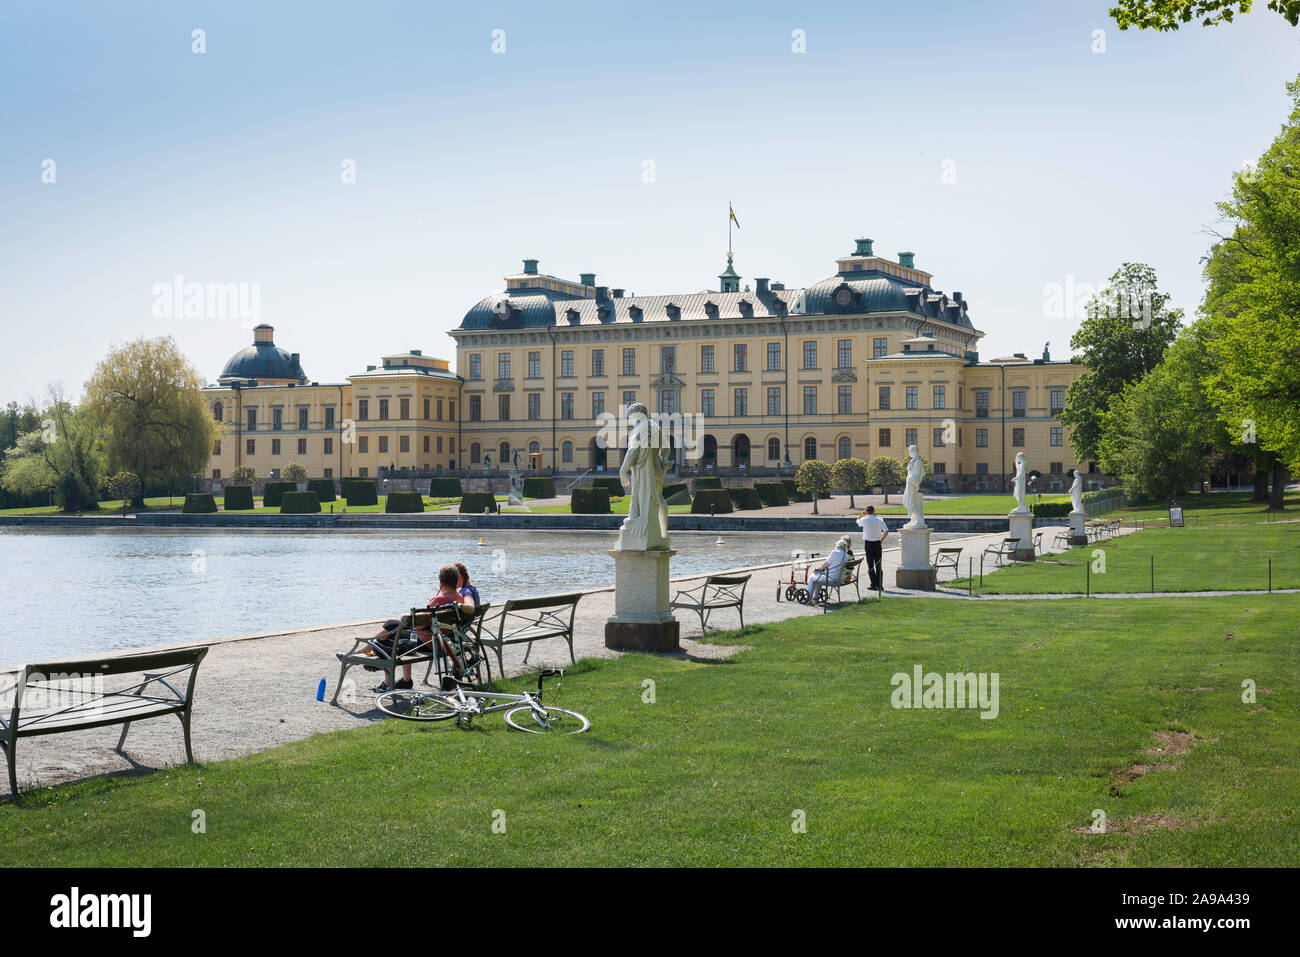 Stockholm Palace, view in summer of tourists sitting on benches facing Drottningholm Palace (Drottningholms Slott) - on Lovön island, Sweden. Stock Photo